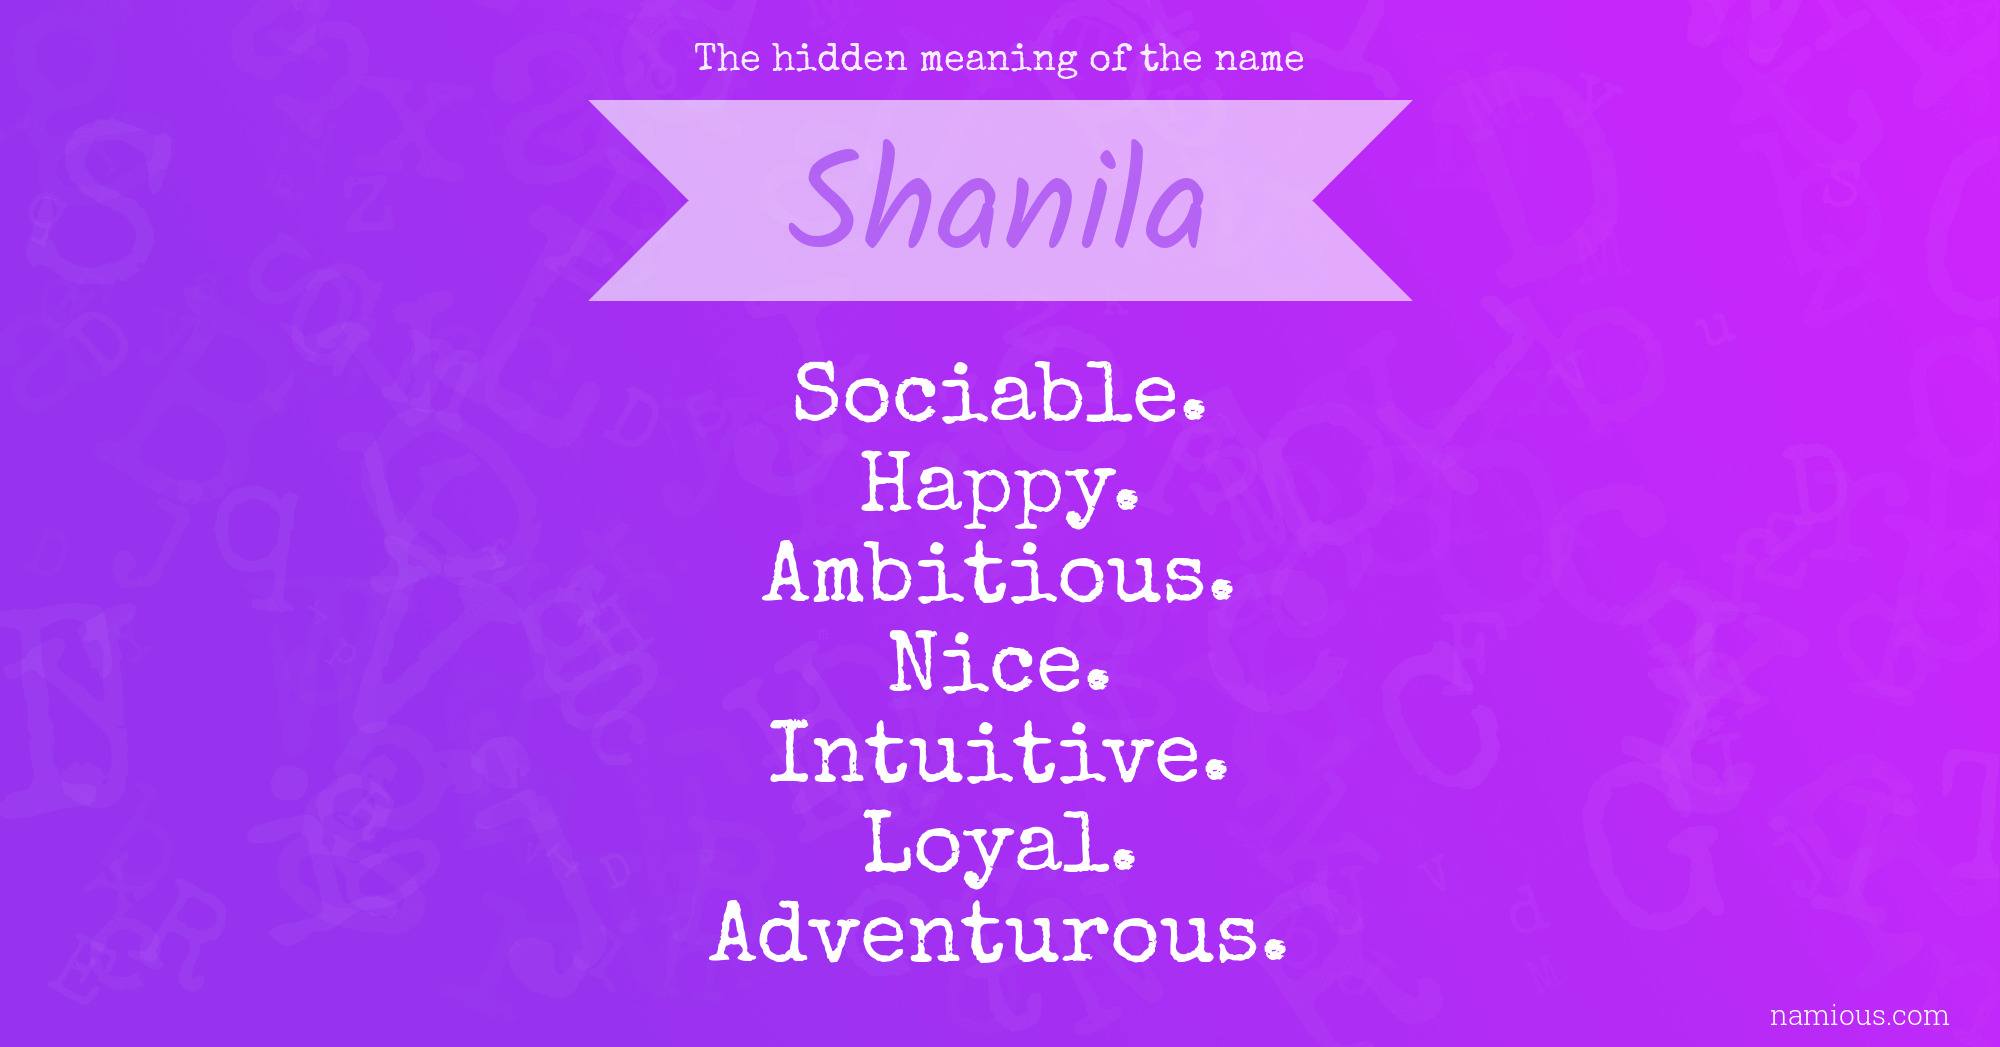 The hidden meaning of the name Shanila